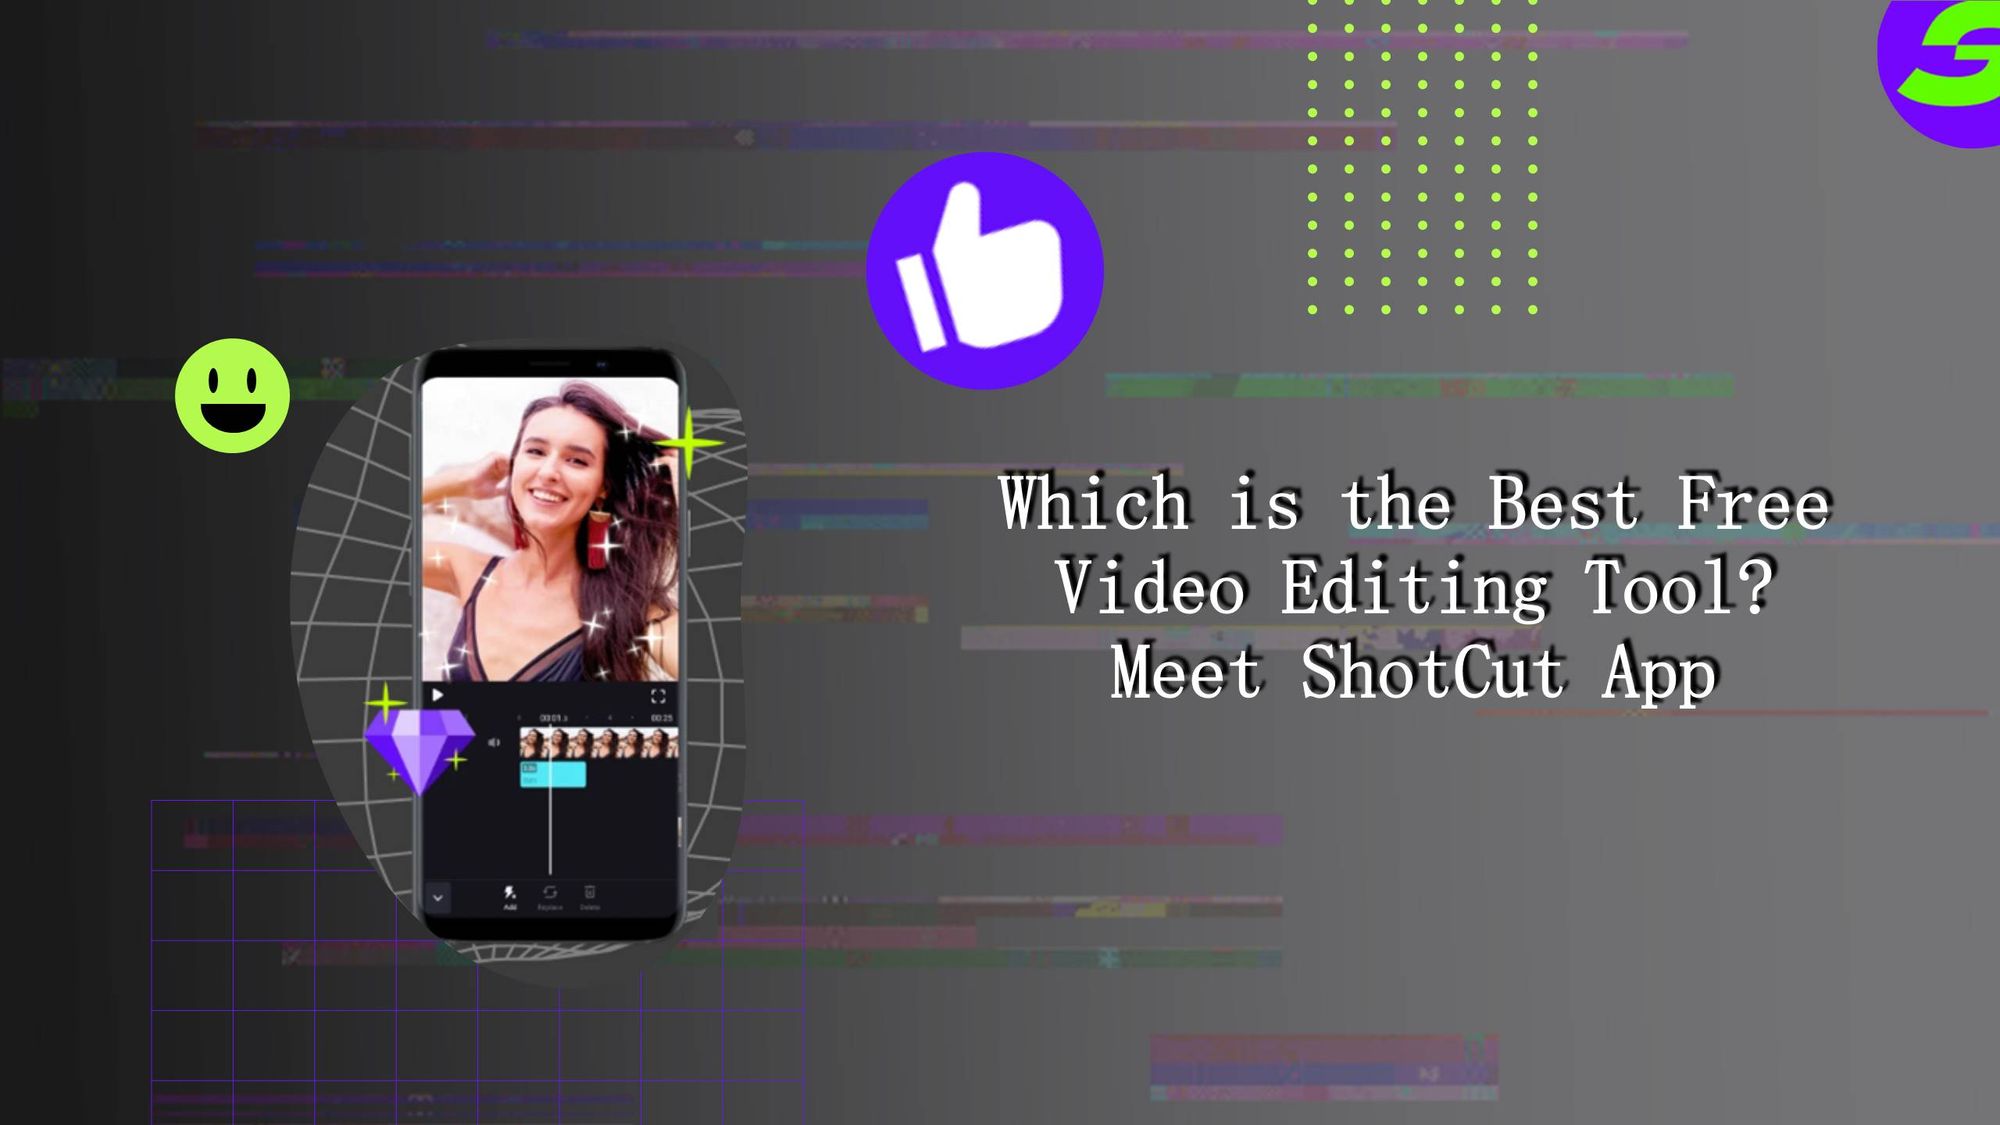 Best Free Video Editing Tool Android app ShotCut free video editor